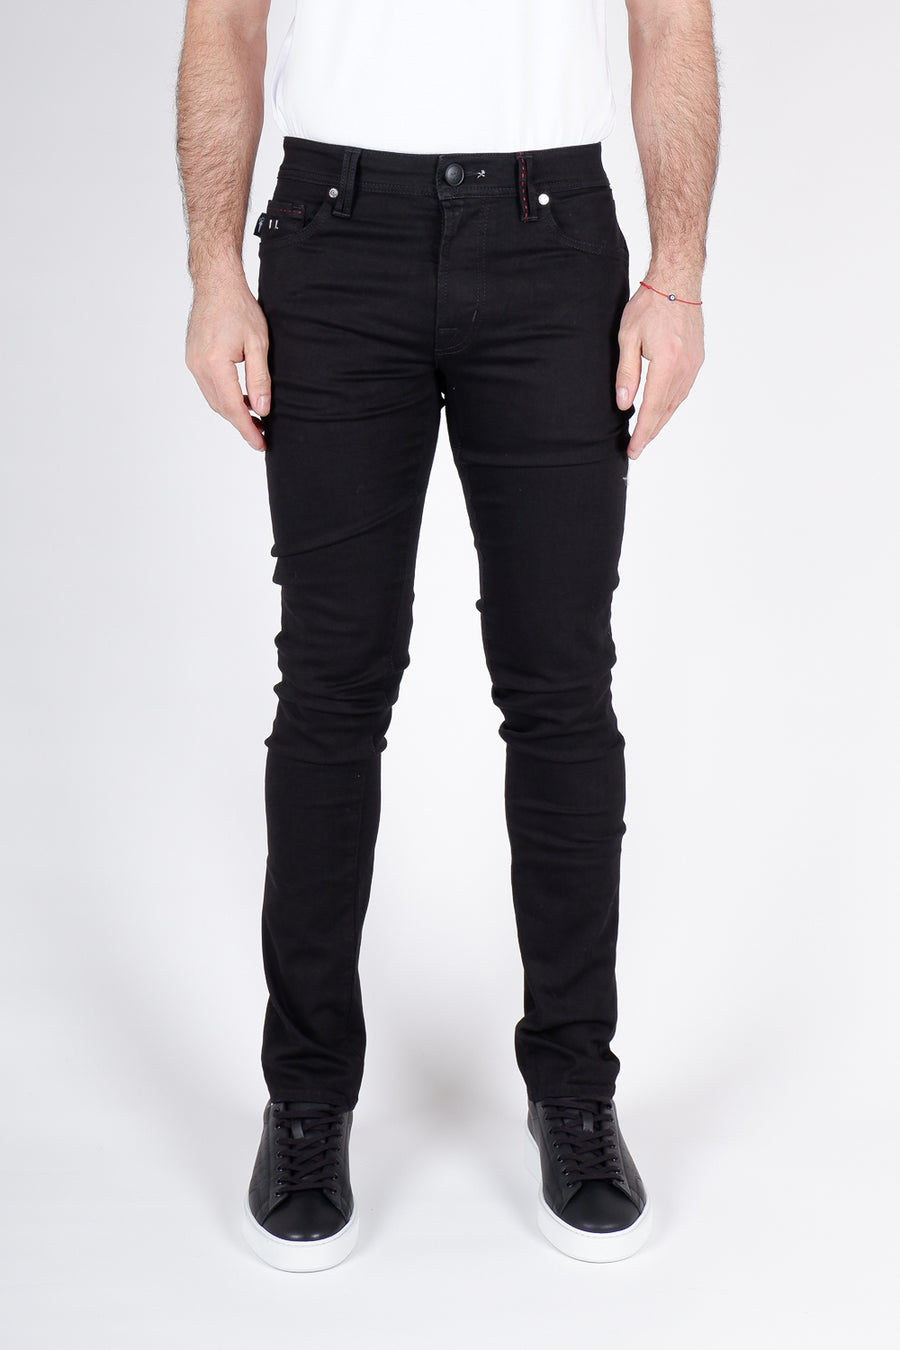 Buy the Tramarossa Leonardo Slim Stretch Denim Black at Intro. Spend £50 for free UK delivery. Official stockists. We ship worldwide.